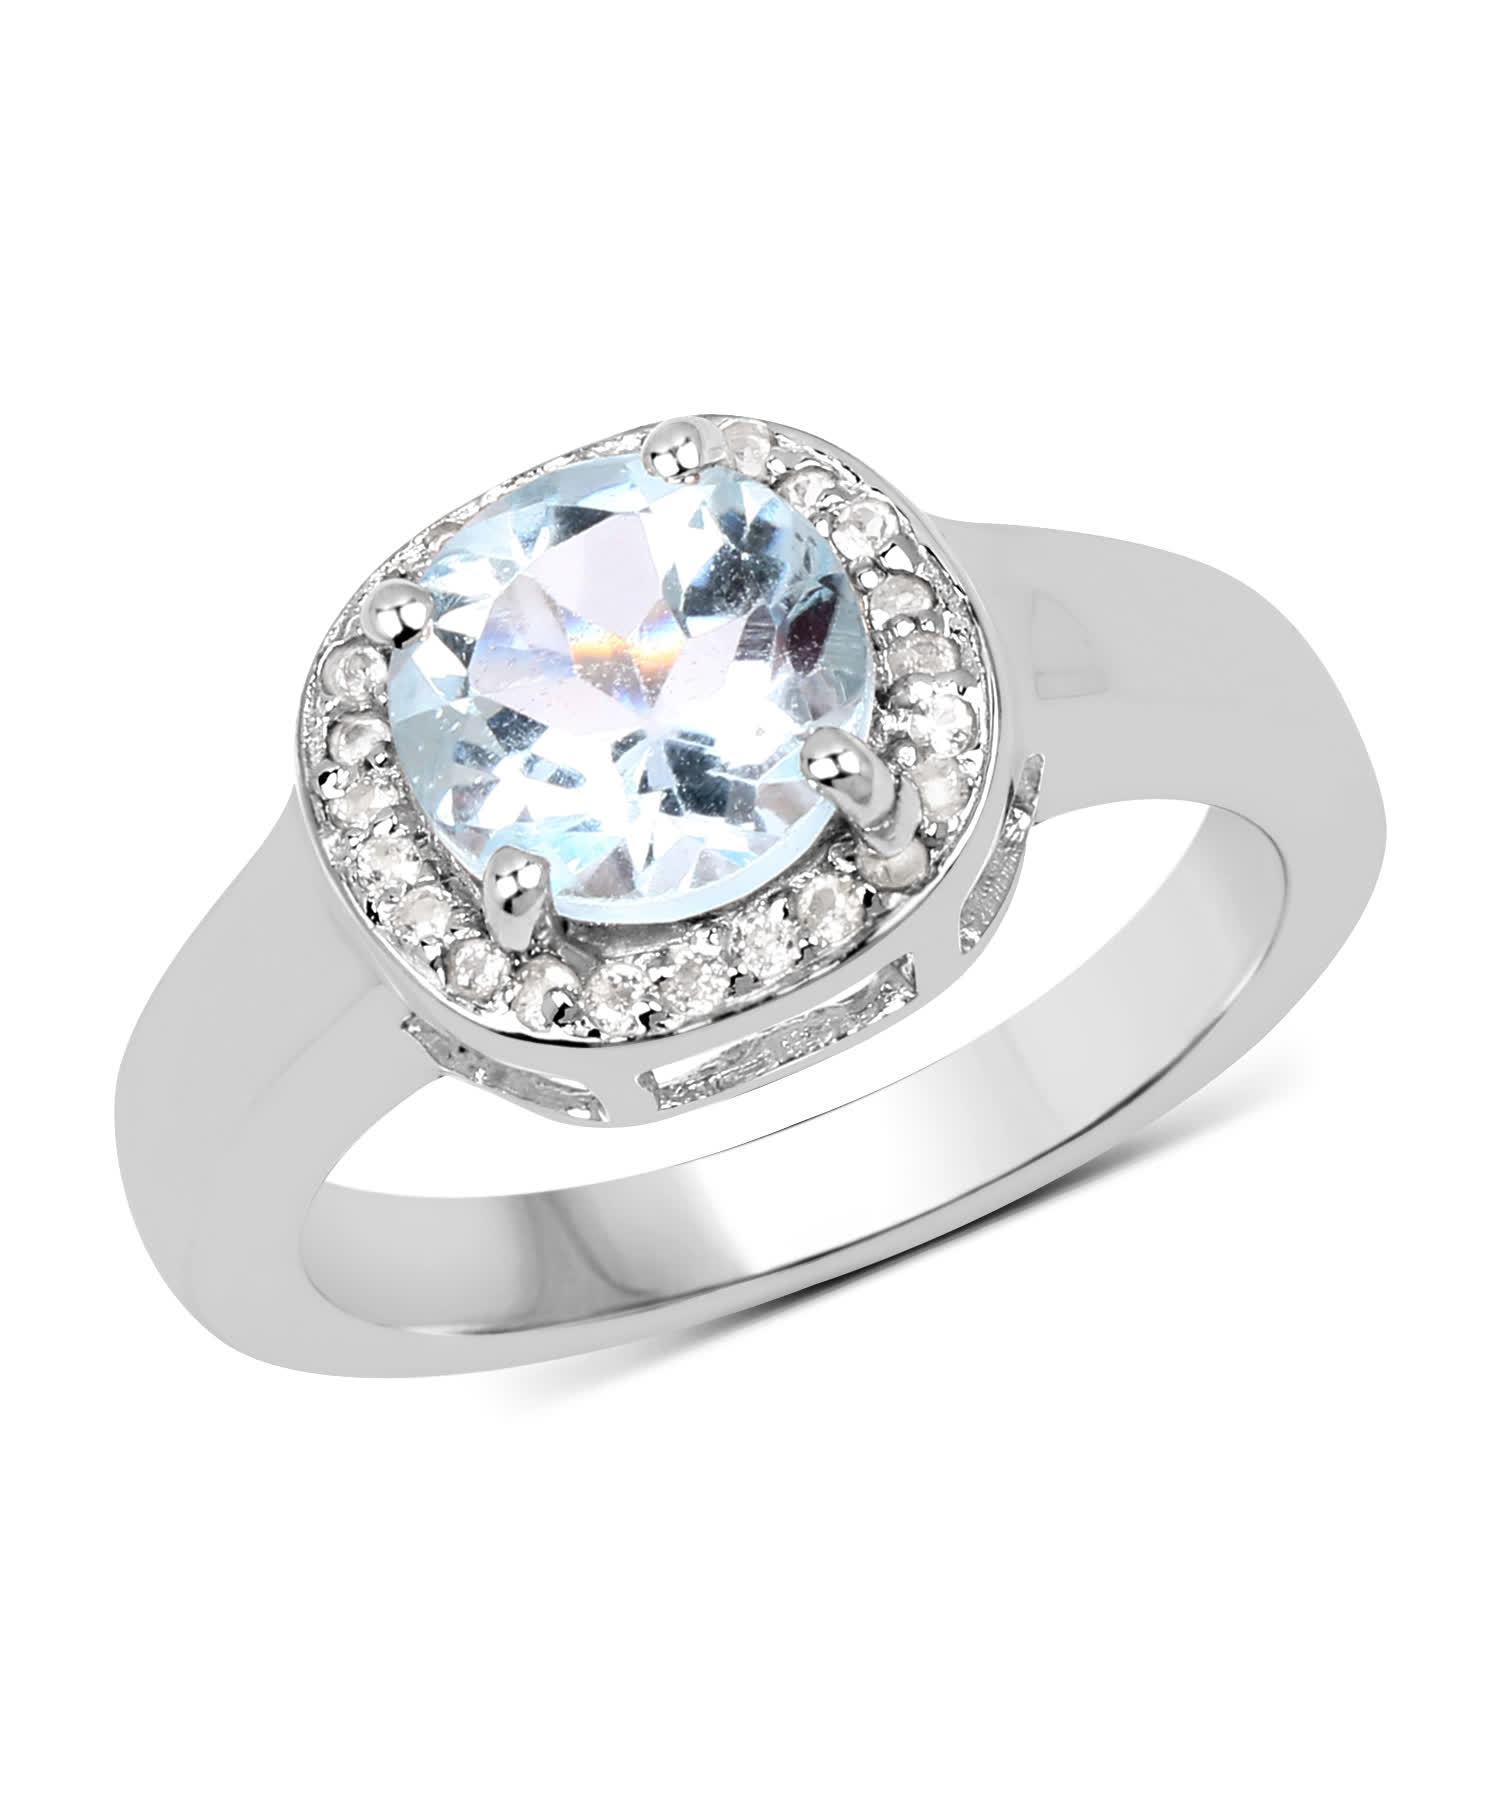 2.37ctw Natural Sky Blue Topaz Rhodium Plated 925 Sterling Silver Halo Right Hand Ring View 1